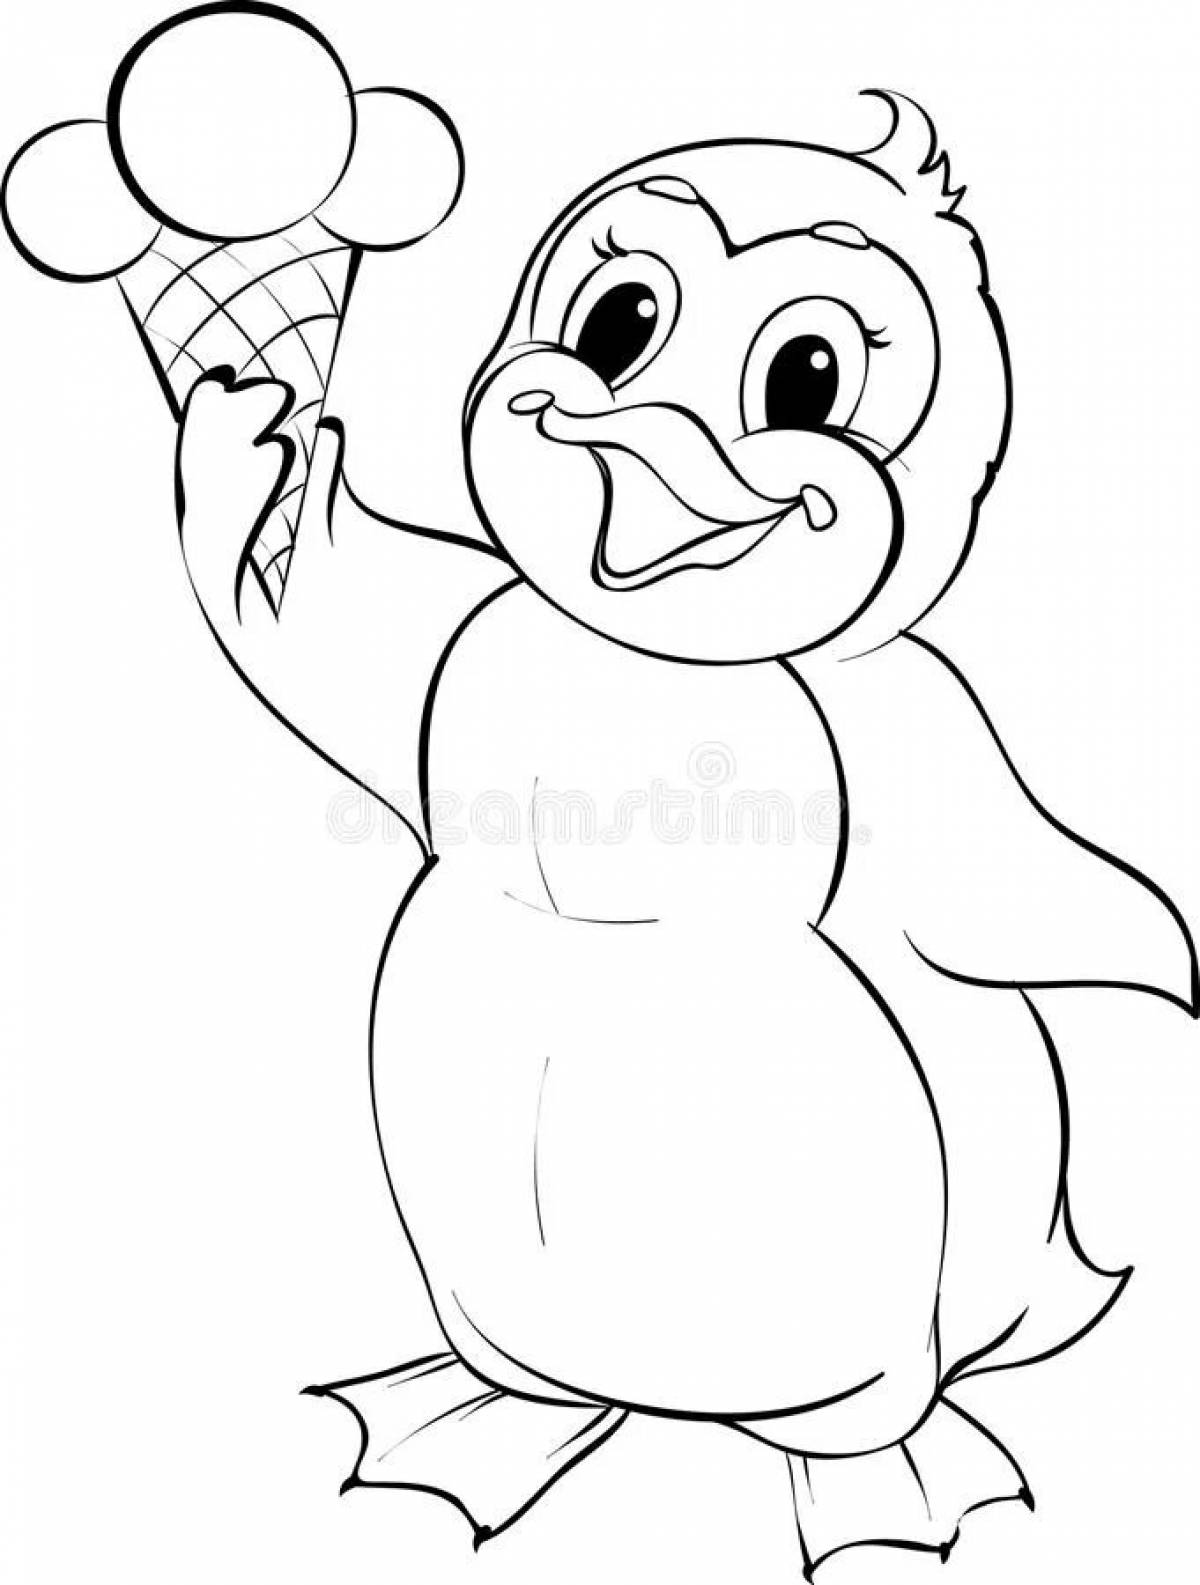 Incredible penguin coloring book for kids